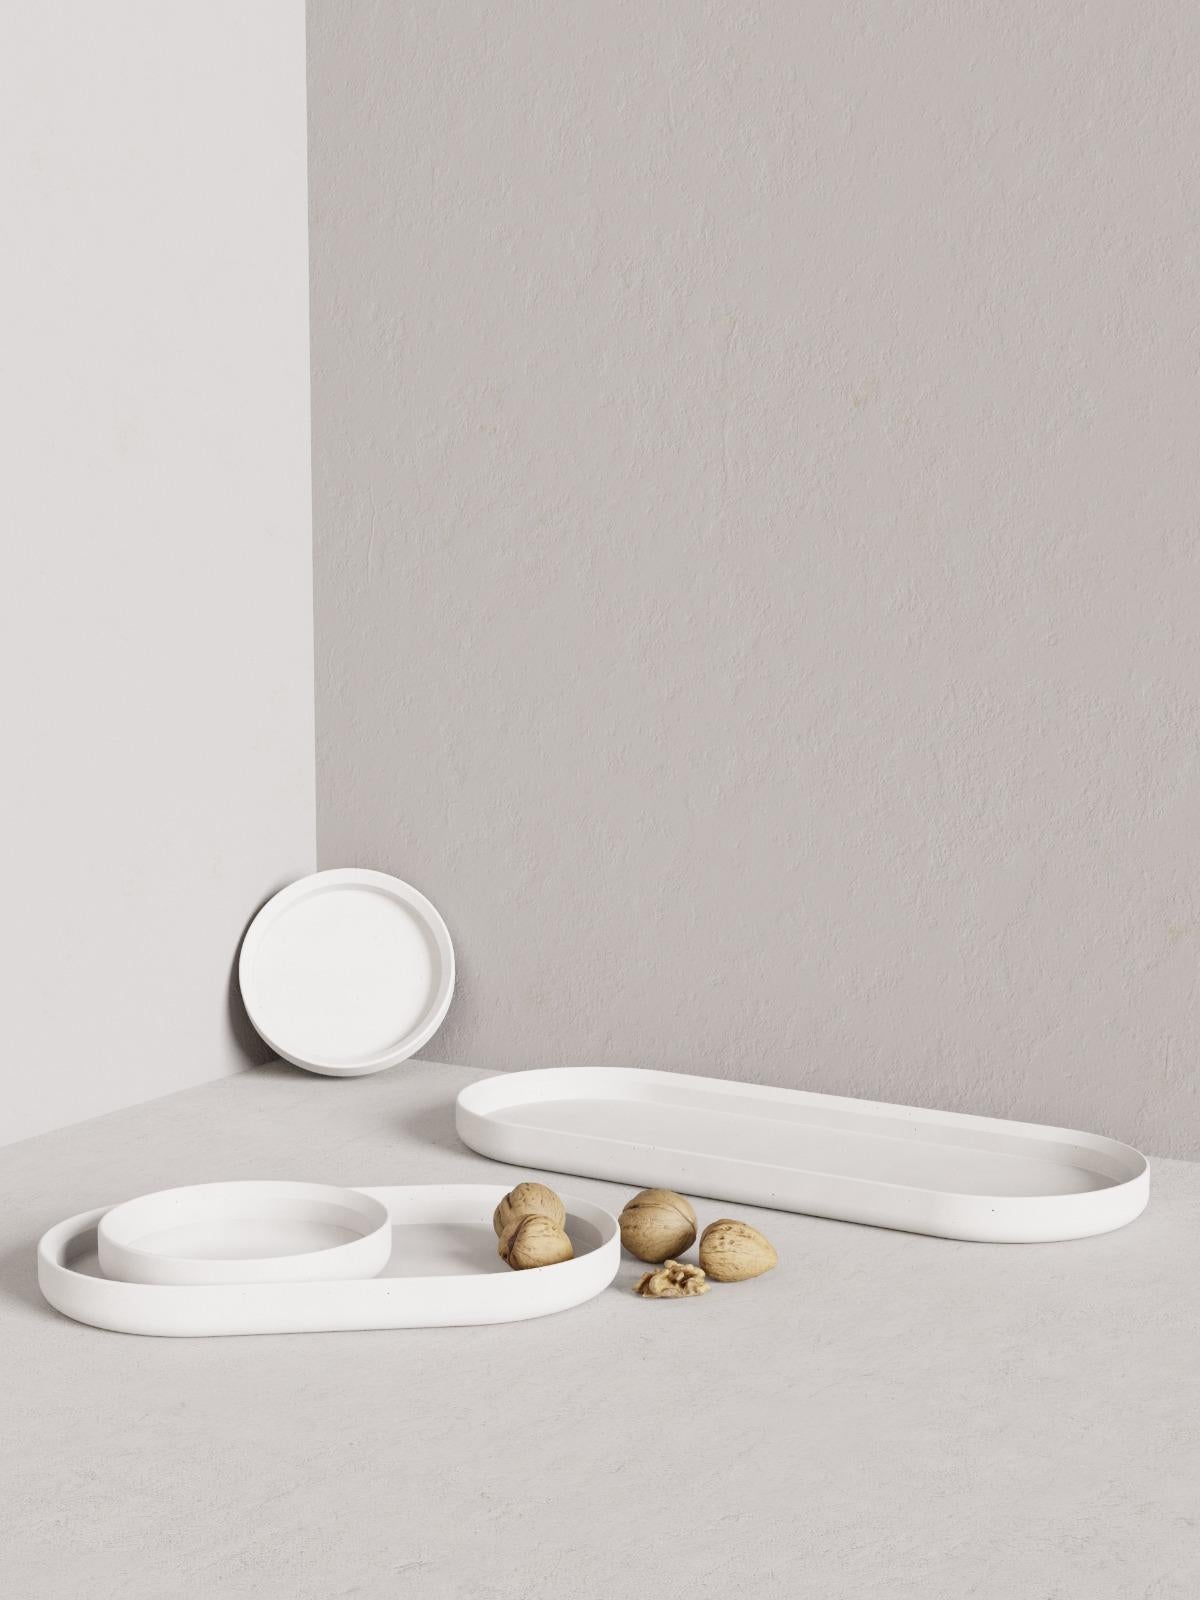 Renzo in a family of multipurpose trays with a very smooth surface and soft curved edges, now available in a different color composition. Each piece is a unique, no two are the same.

Mod II measure: 40 x 23 x 4cm.